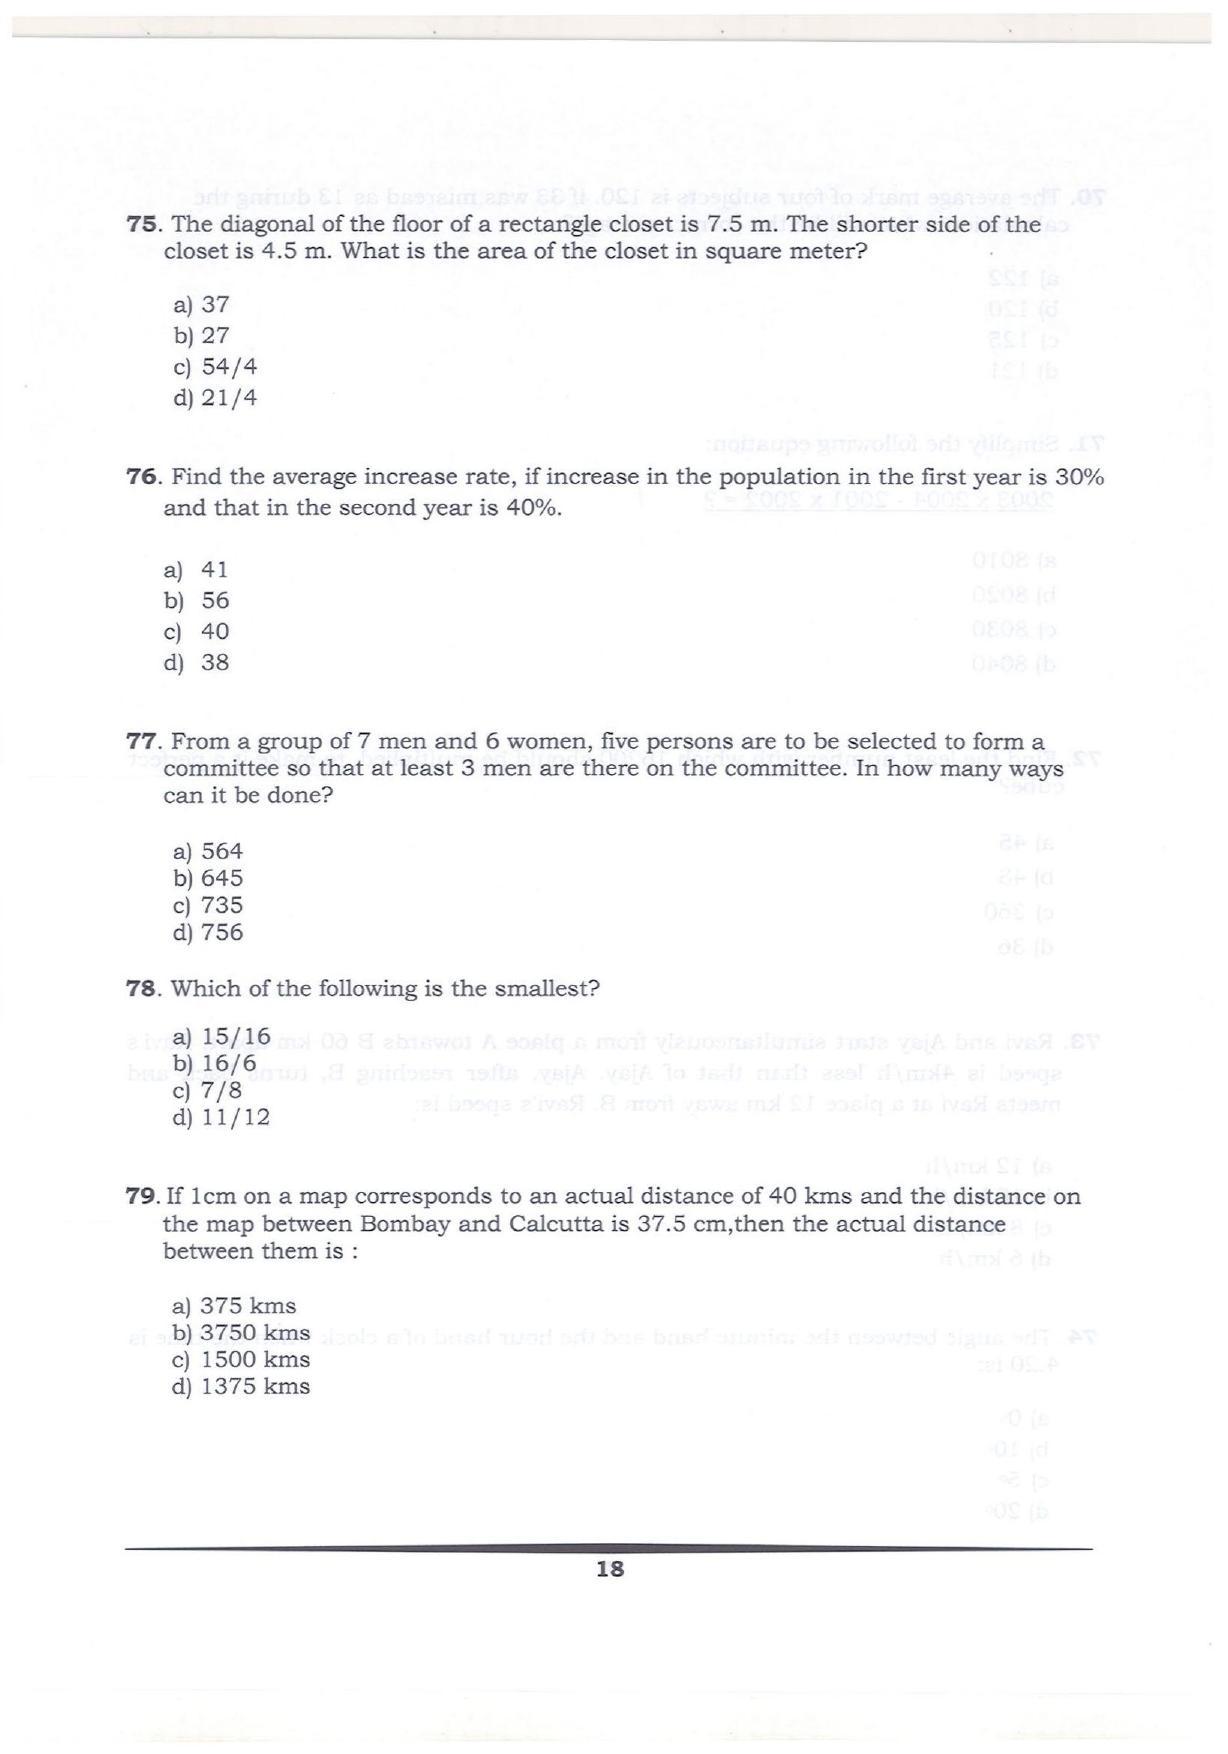 KMAT Question Papers - February 2018 - Page 17